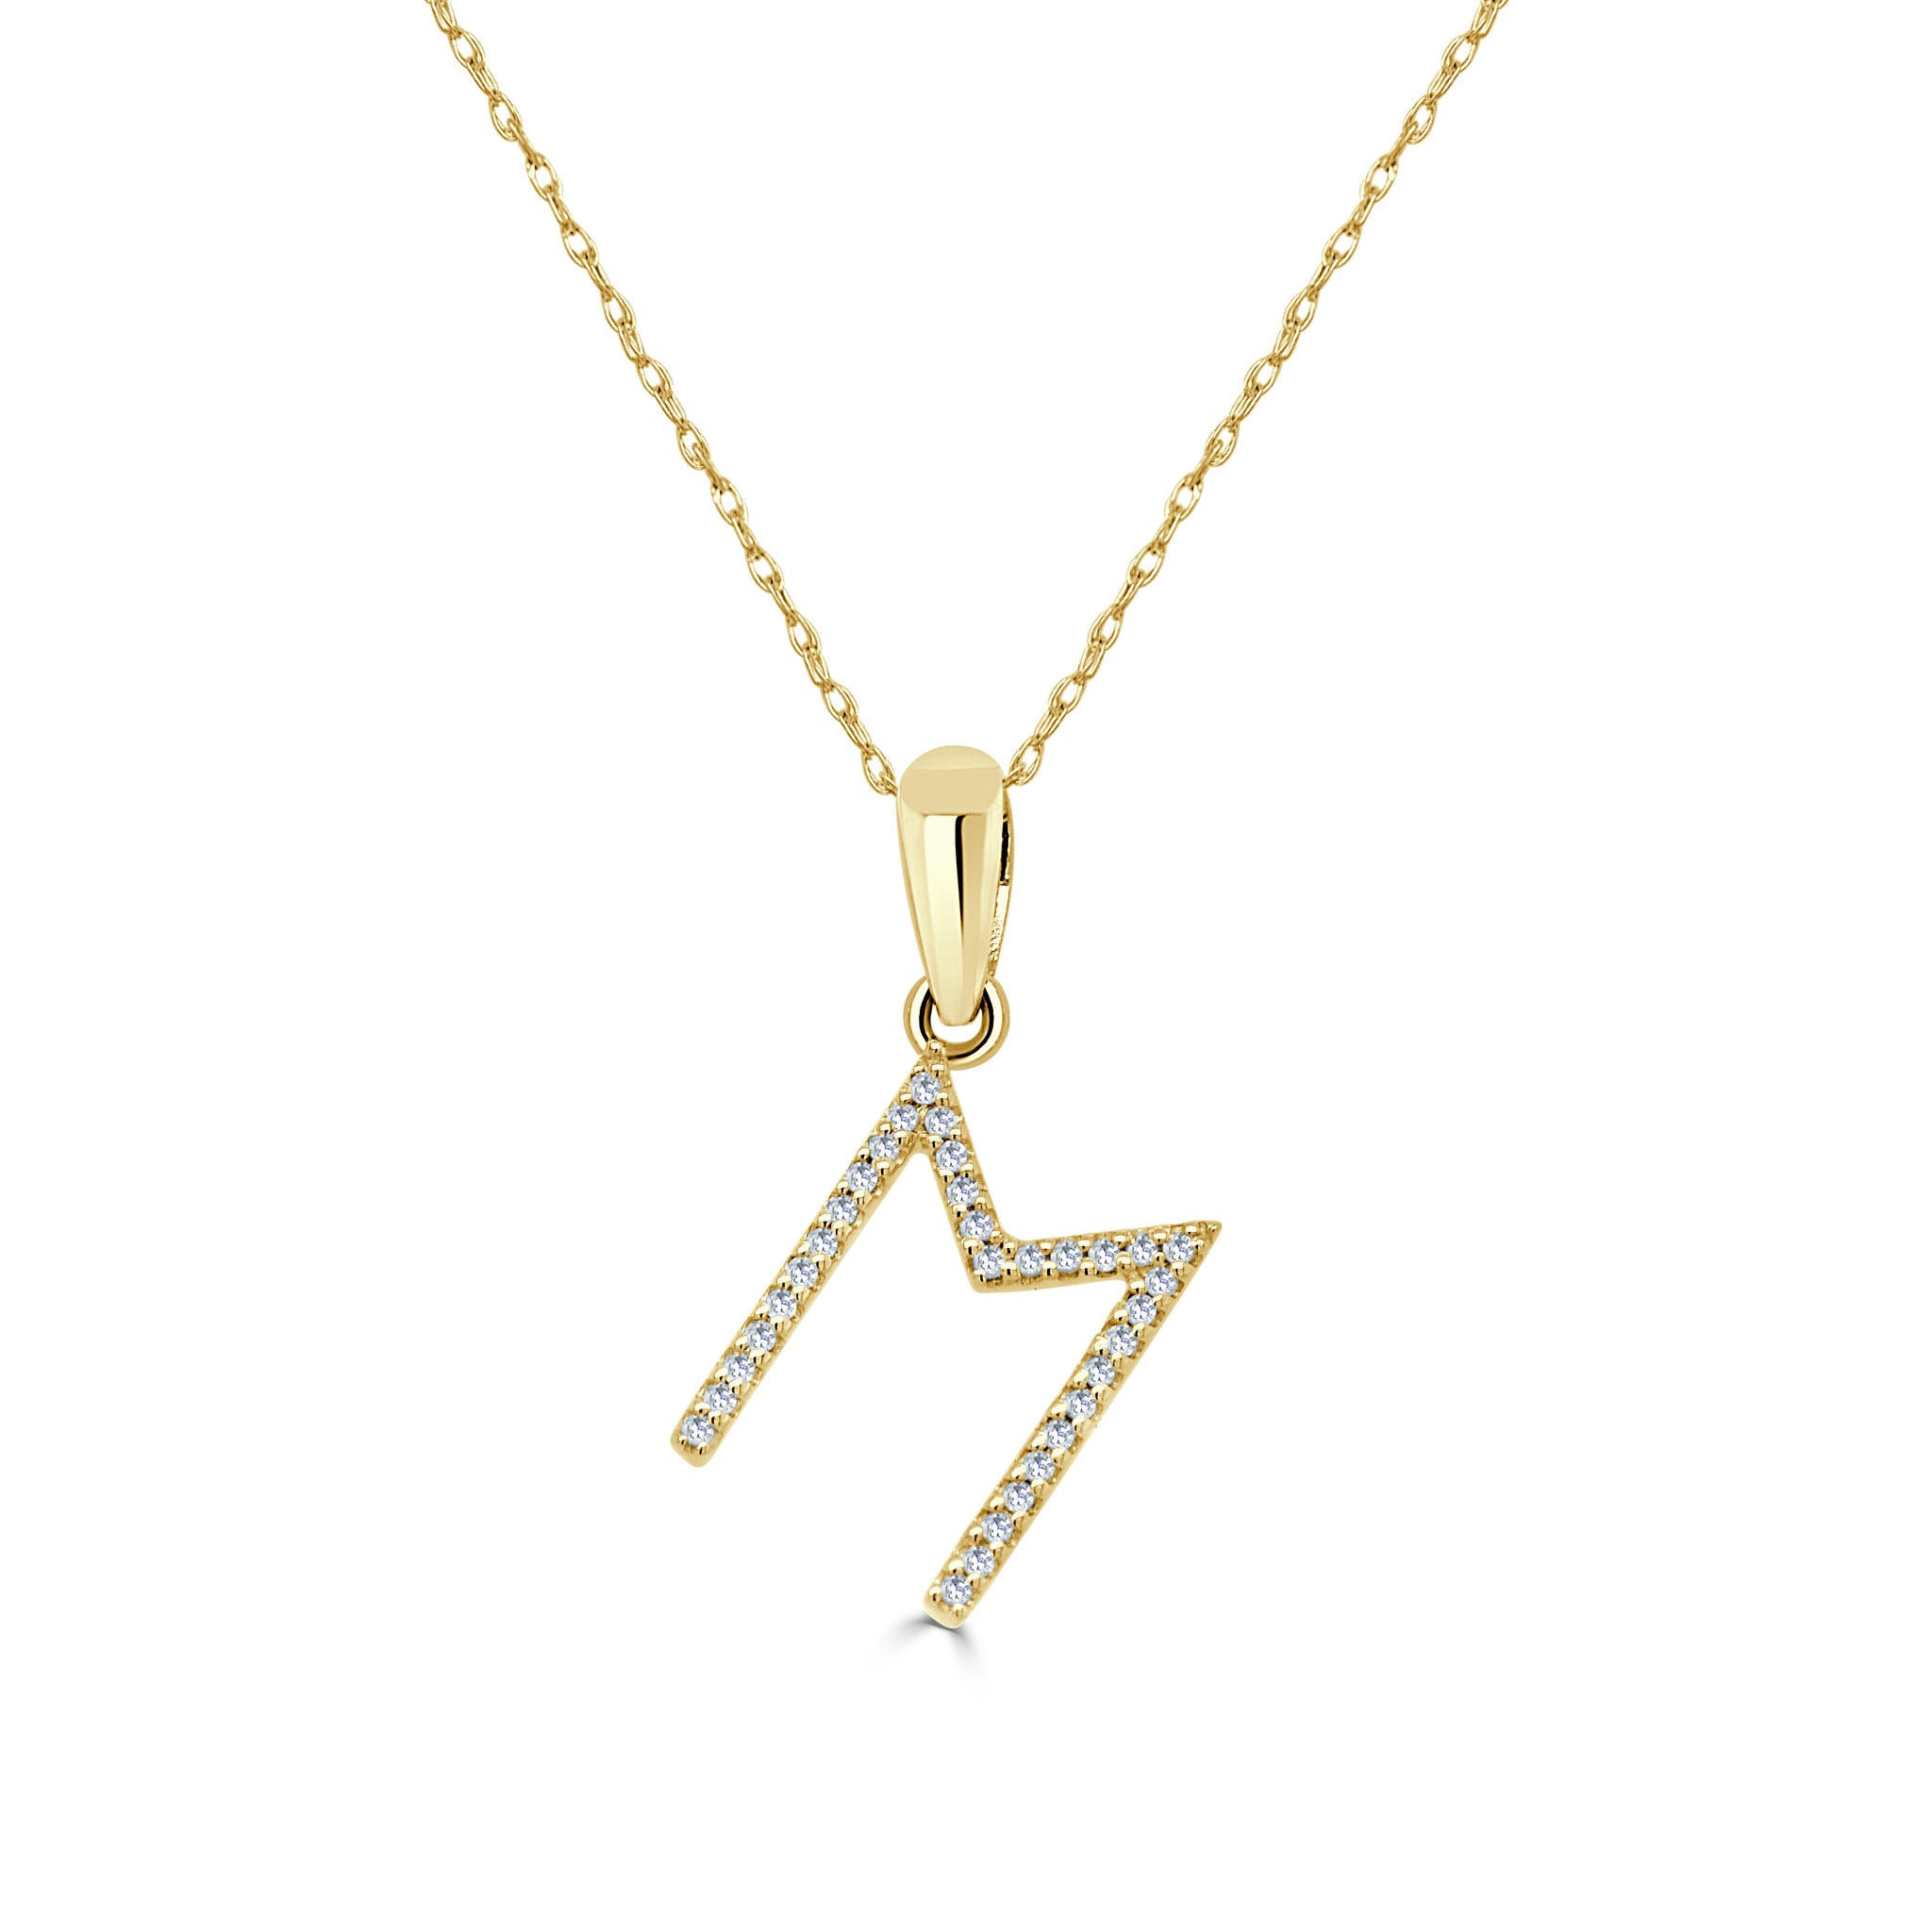 Diamond Letter M Pendant Necklace in 14k Yellow Gold